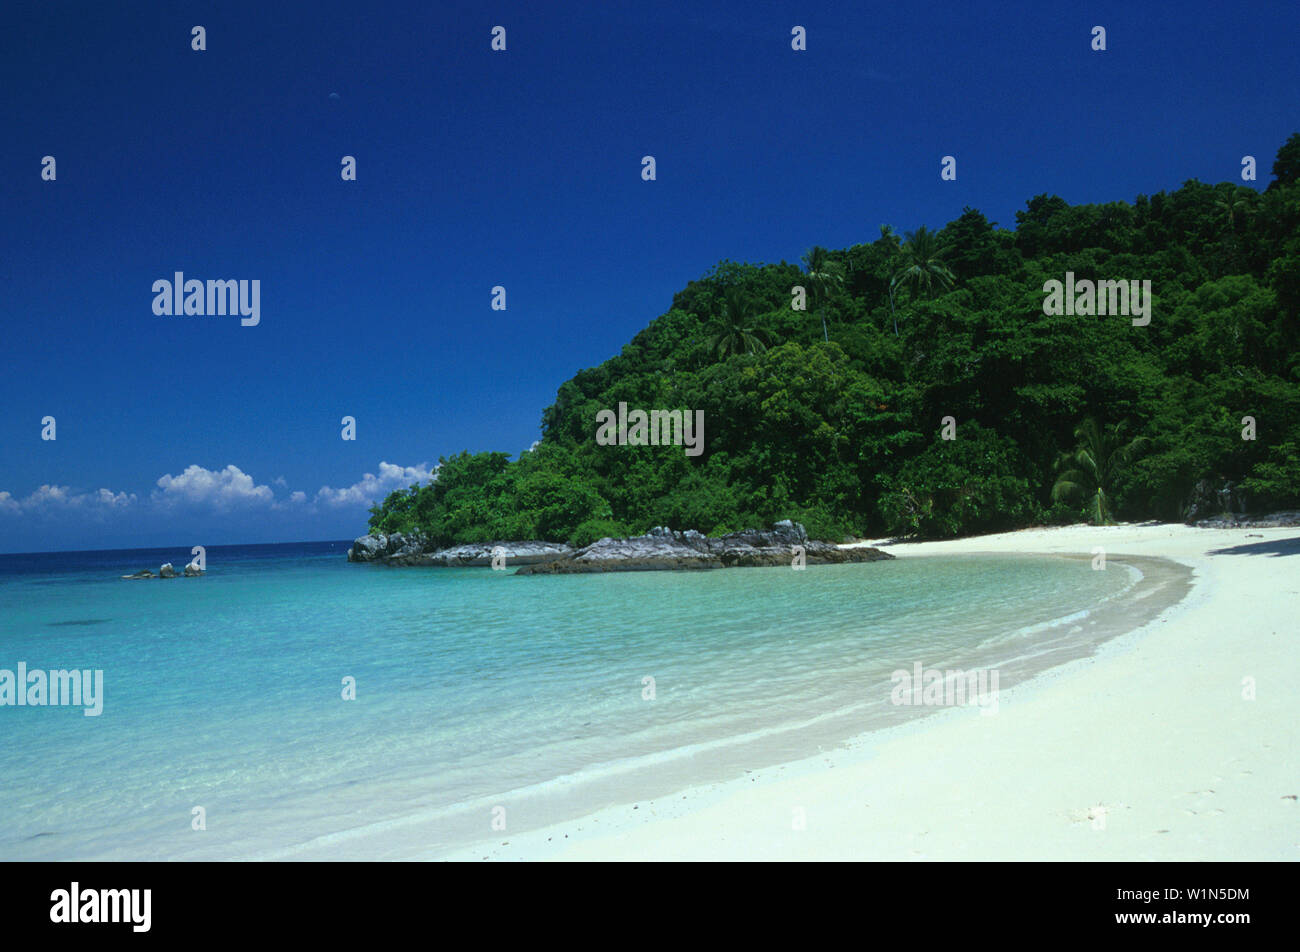 Pulau Tengol, Insel, Malaysia Suedchinesisches Meer, Released Stock Photo